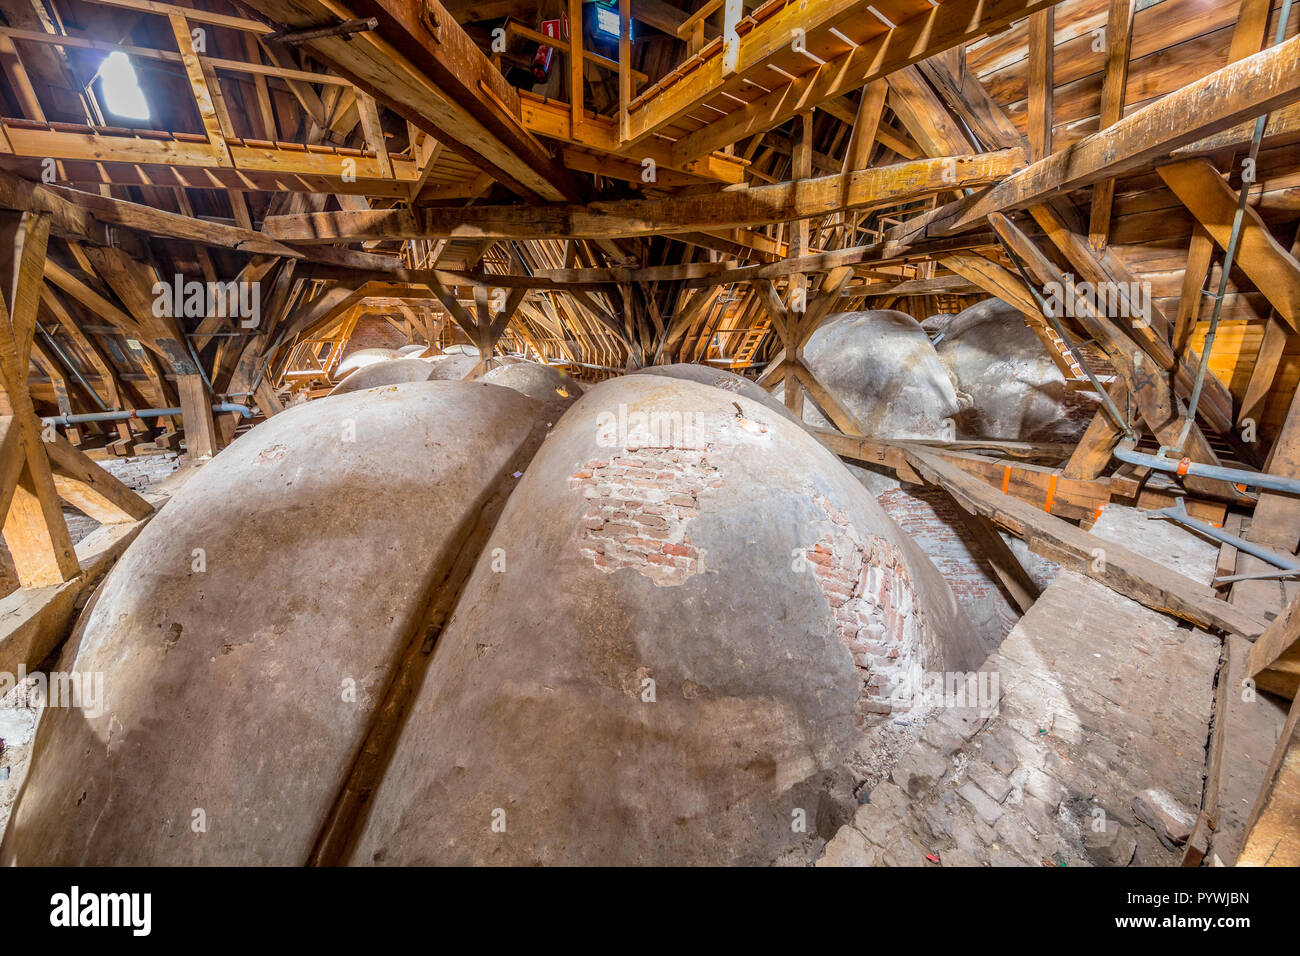 Domed ceiling on Attic of an old church from the 16th century in the Netherlands Stock Photo